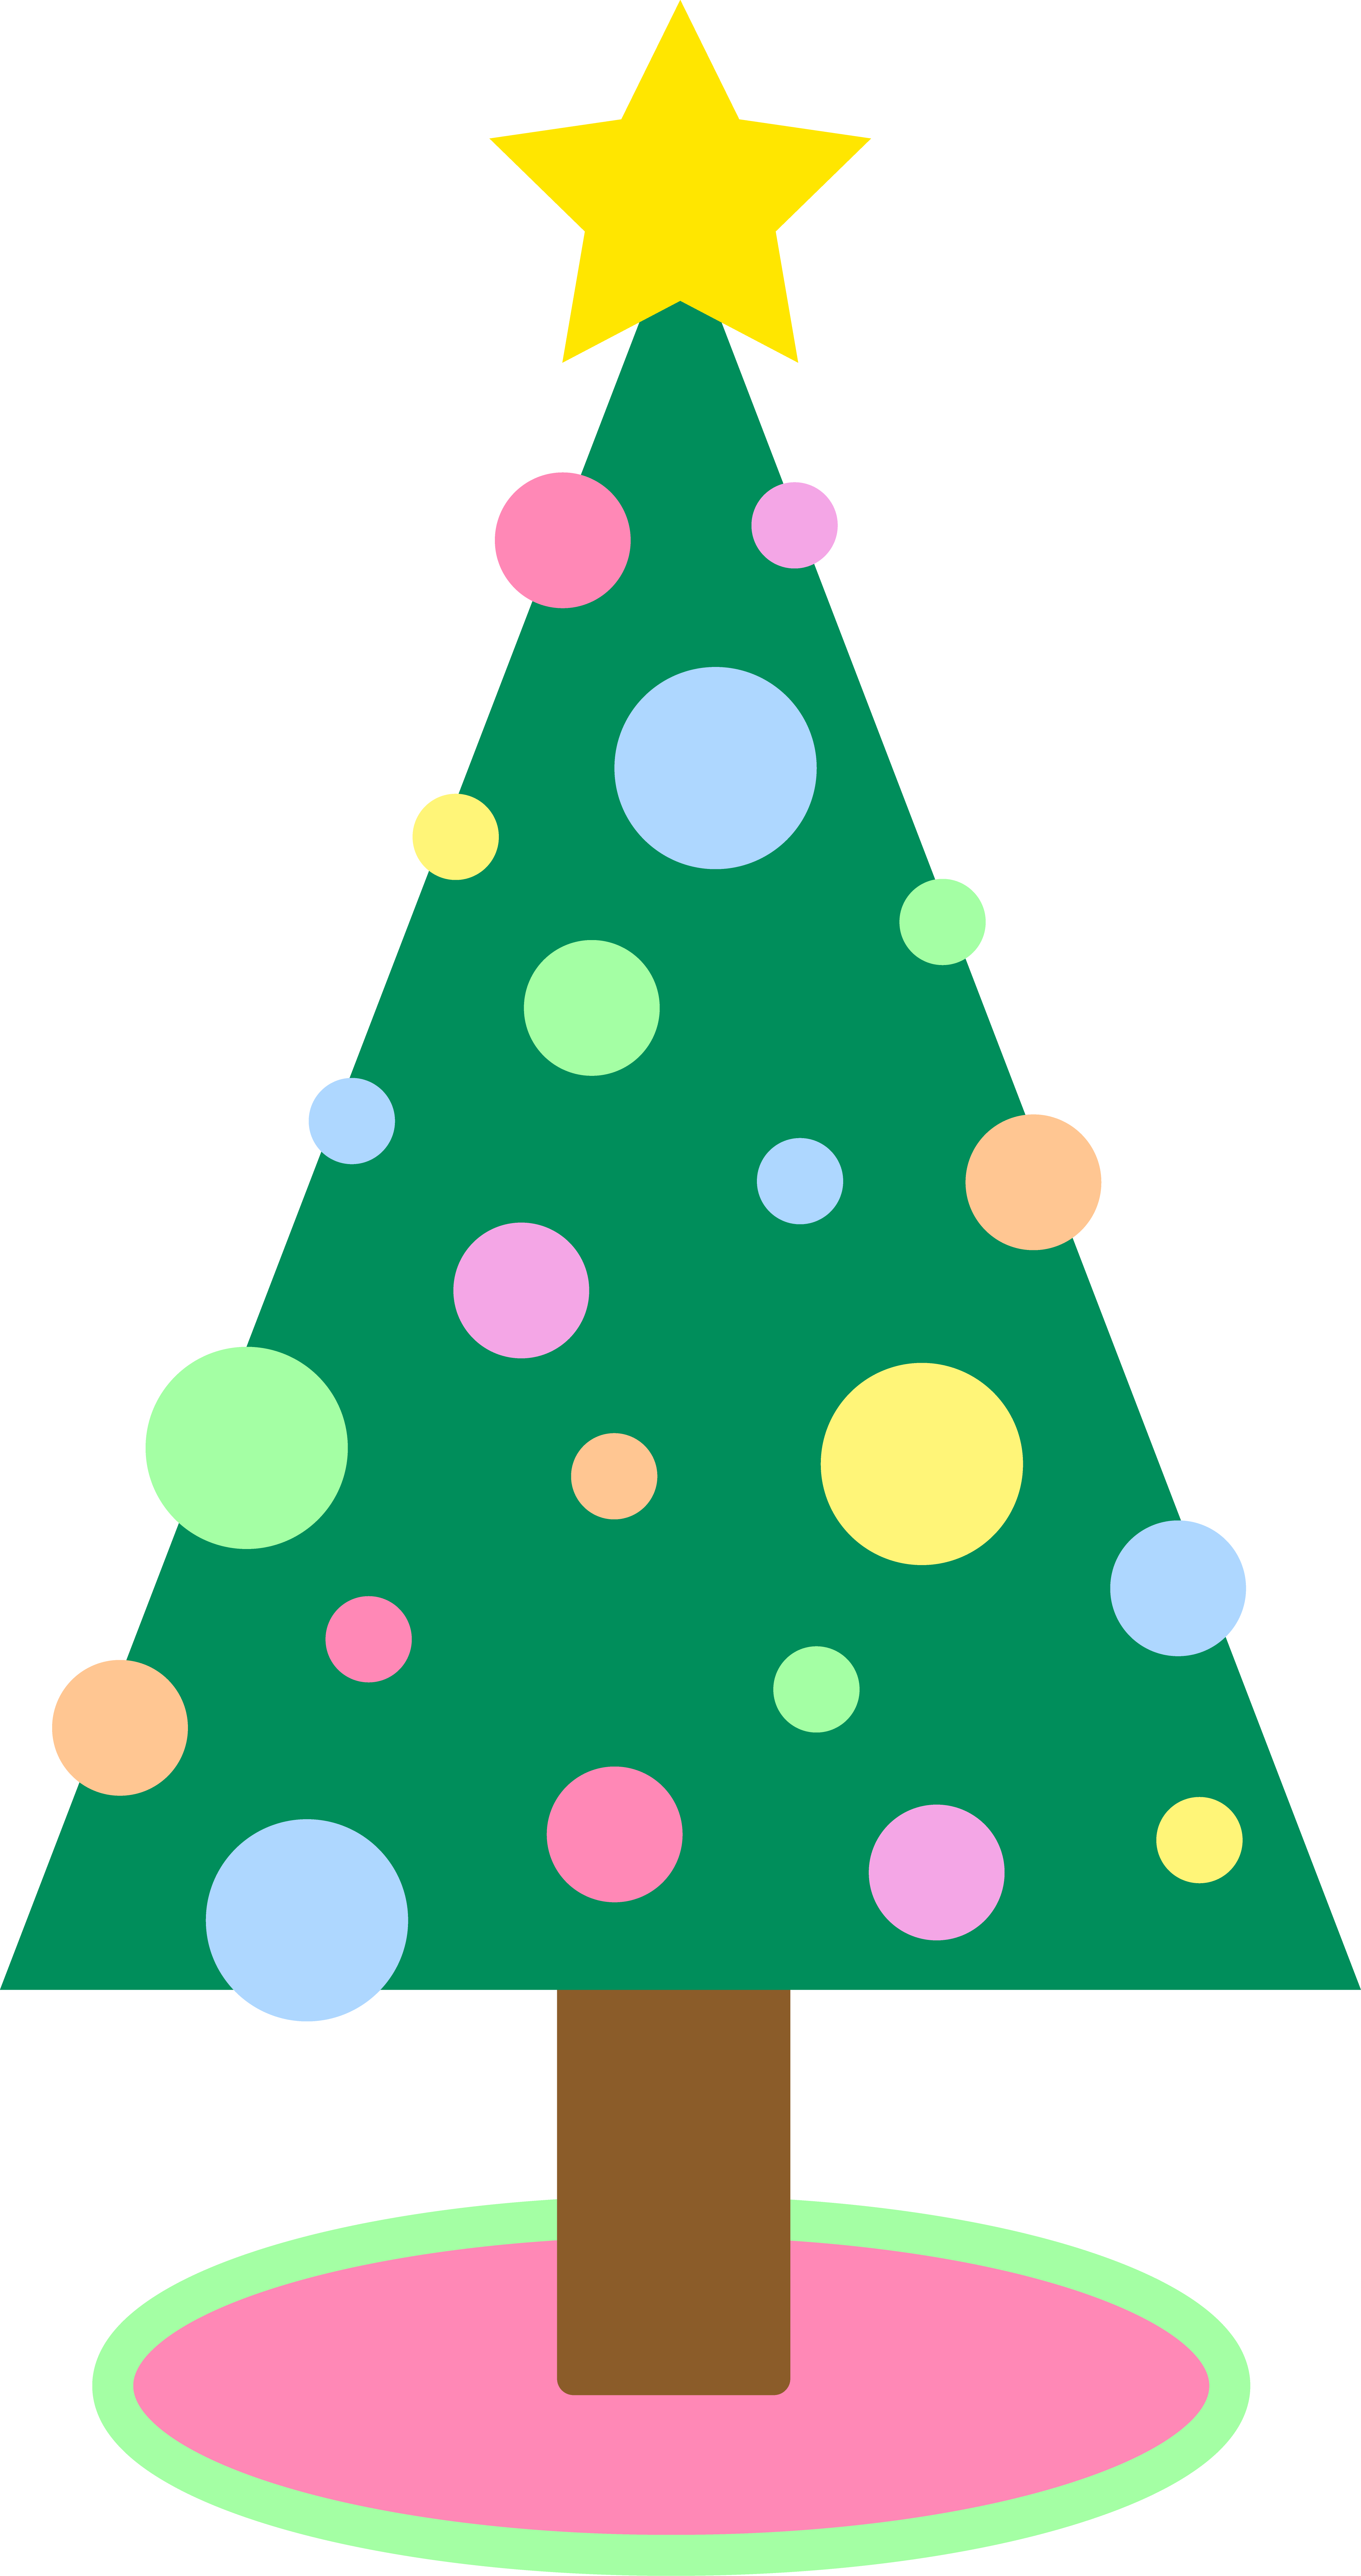 Free Christmas Tree Artwork, Download Free Clip Art, Free Clip Art on Clipart Library